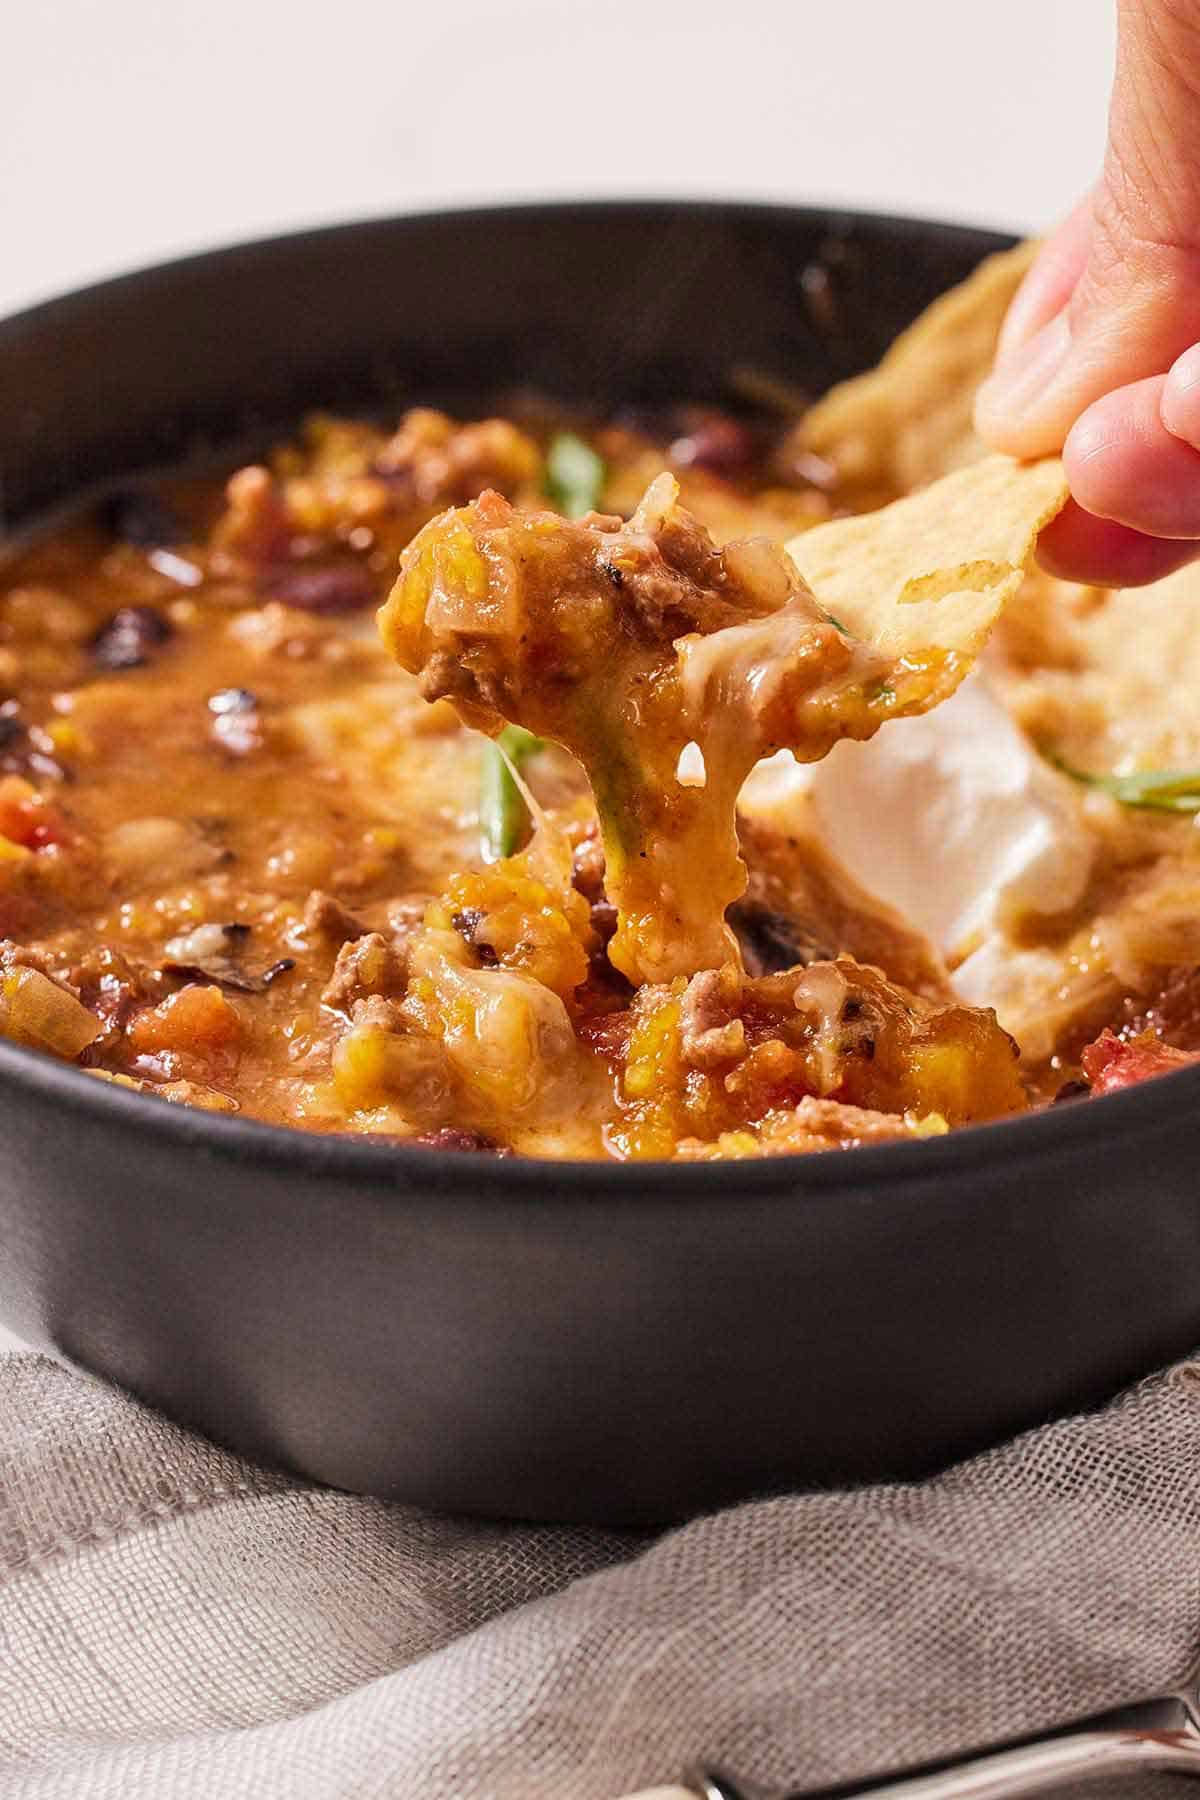 A bowl of butternut squash chili with a chip scooping out some.